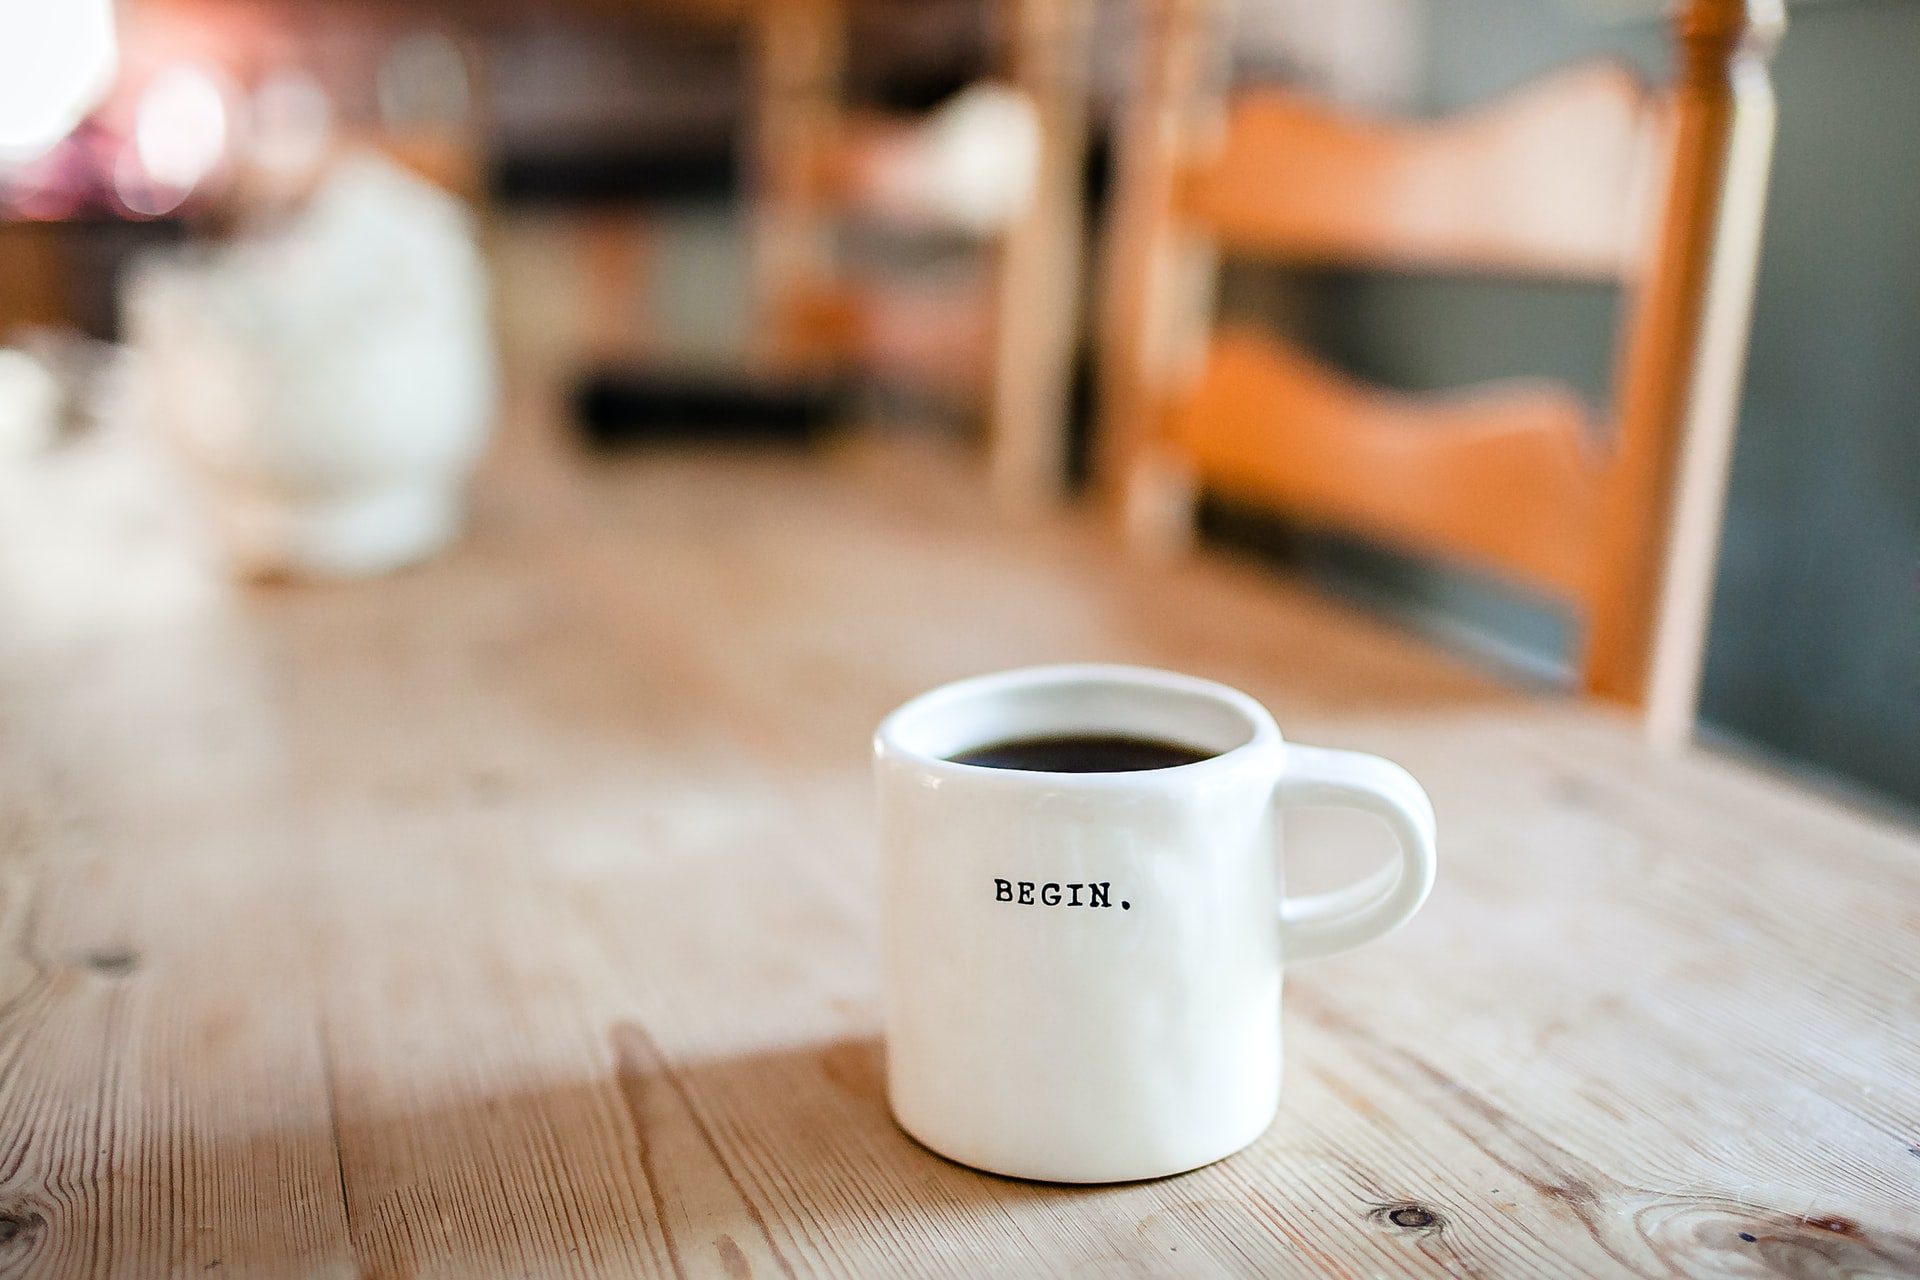 Coffee cup with the word "Begin", on it sitting on a wooden table.